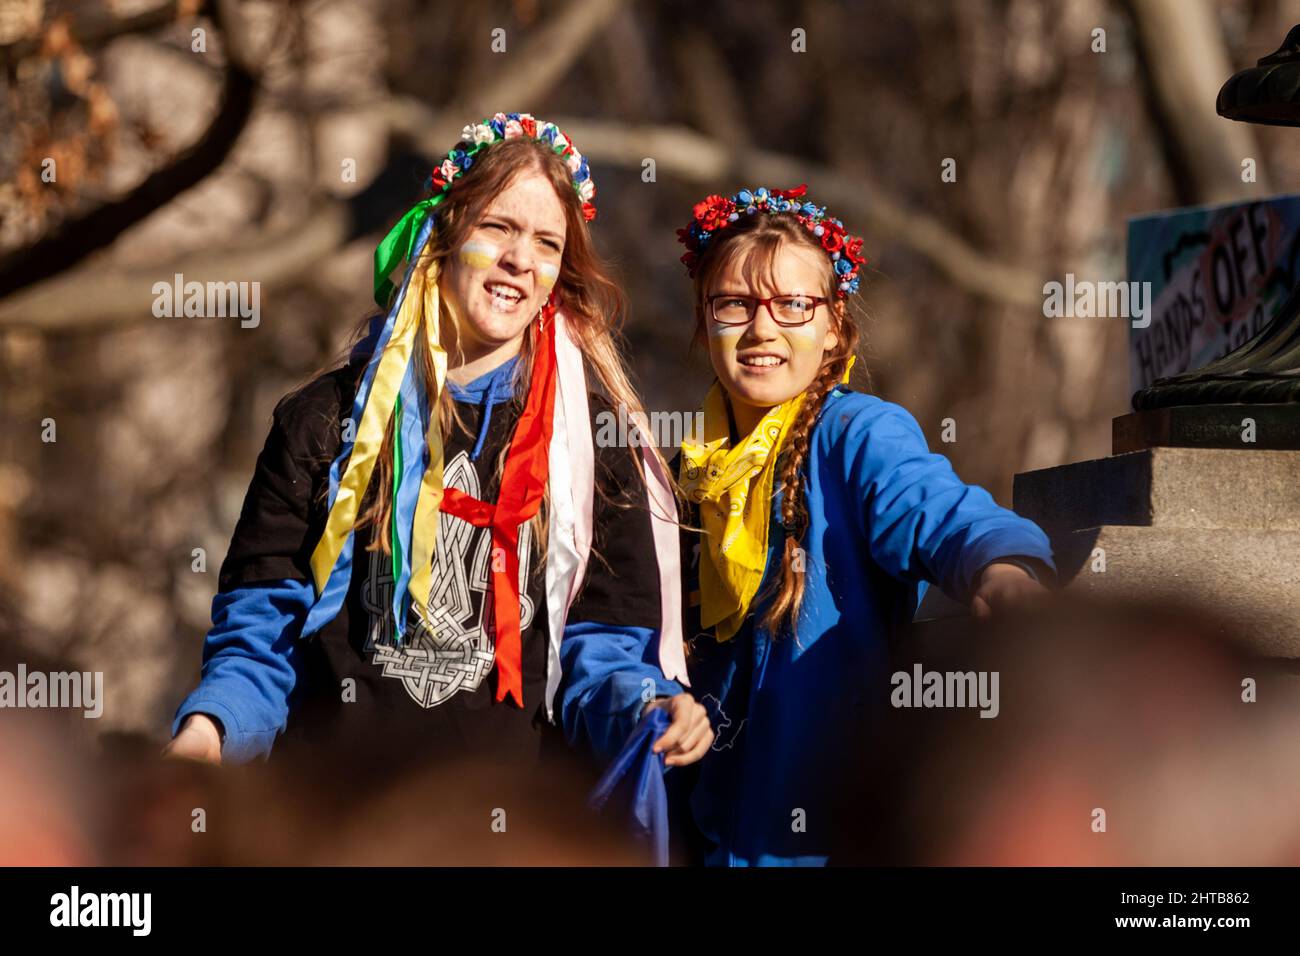 Washington, DC, USA, 27 February, 2021.  Pictured: Protesters wear flowers and ribbons in their hair during a rally for Ukraine at the White House.  Thousands of people from across the United States gathered to thank the US and other countries for their help, and to demand a no-fly zone and other assistance for Ukraine.  The event was sponsored by United Help Ukraine and US Ukrainian Activists, both U.S.-based assistance and advocacy organizations.  Credit: Allison Bailey / Alamy Live News Stock Photo